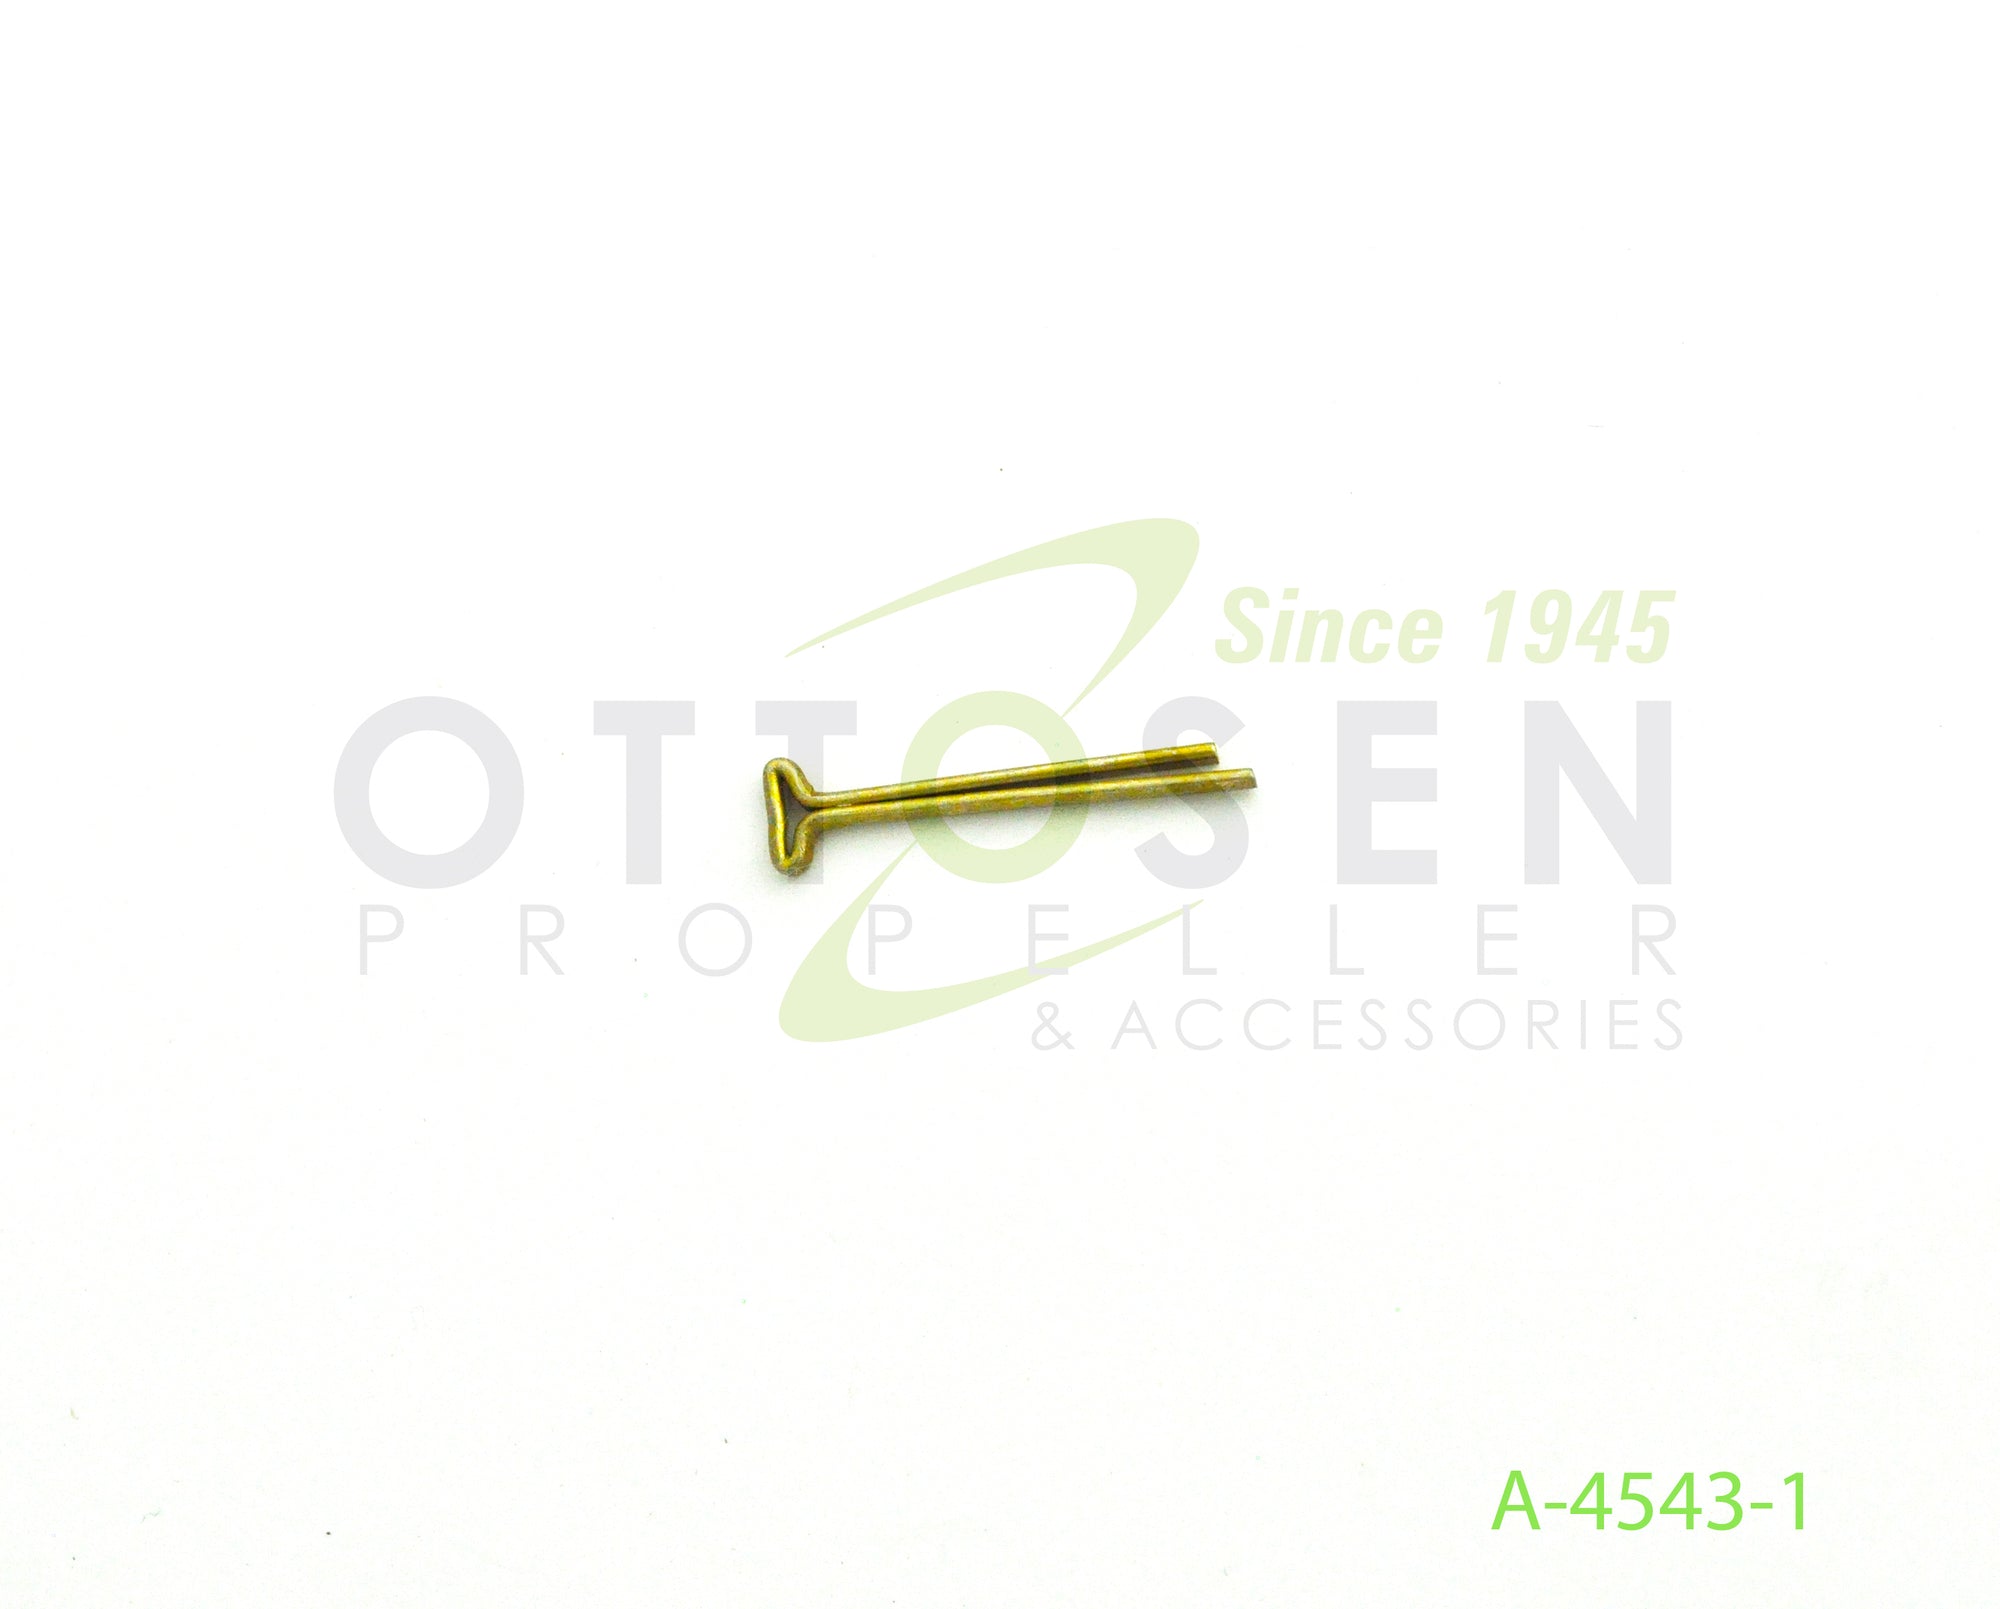 A-4543-1-HARTZELL-PROPELLER-T-HEAD-COTTER-PIN-PICTURE-1